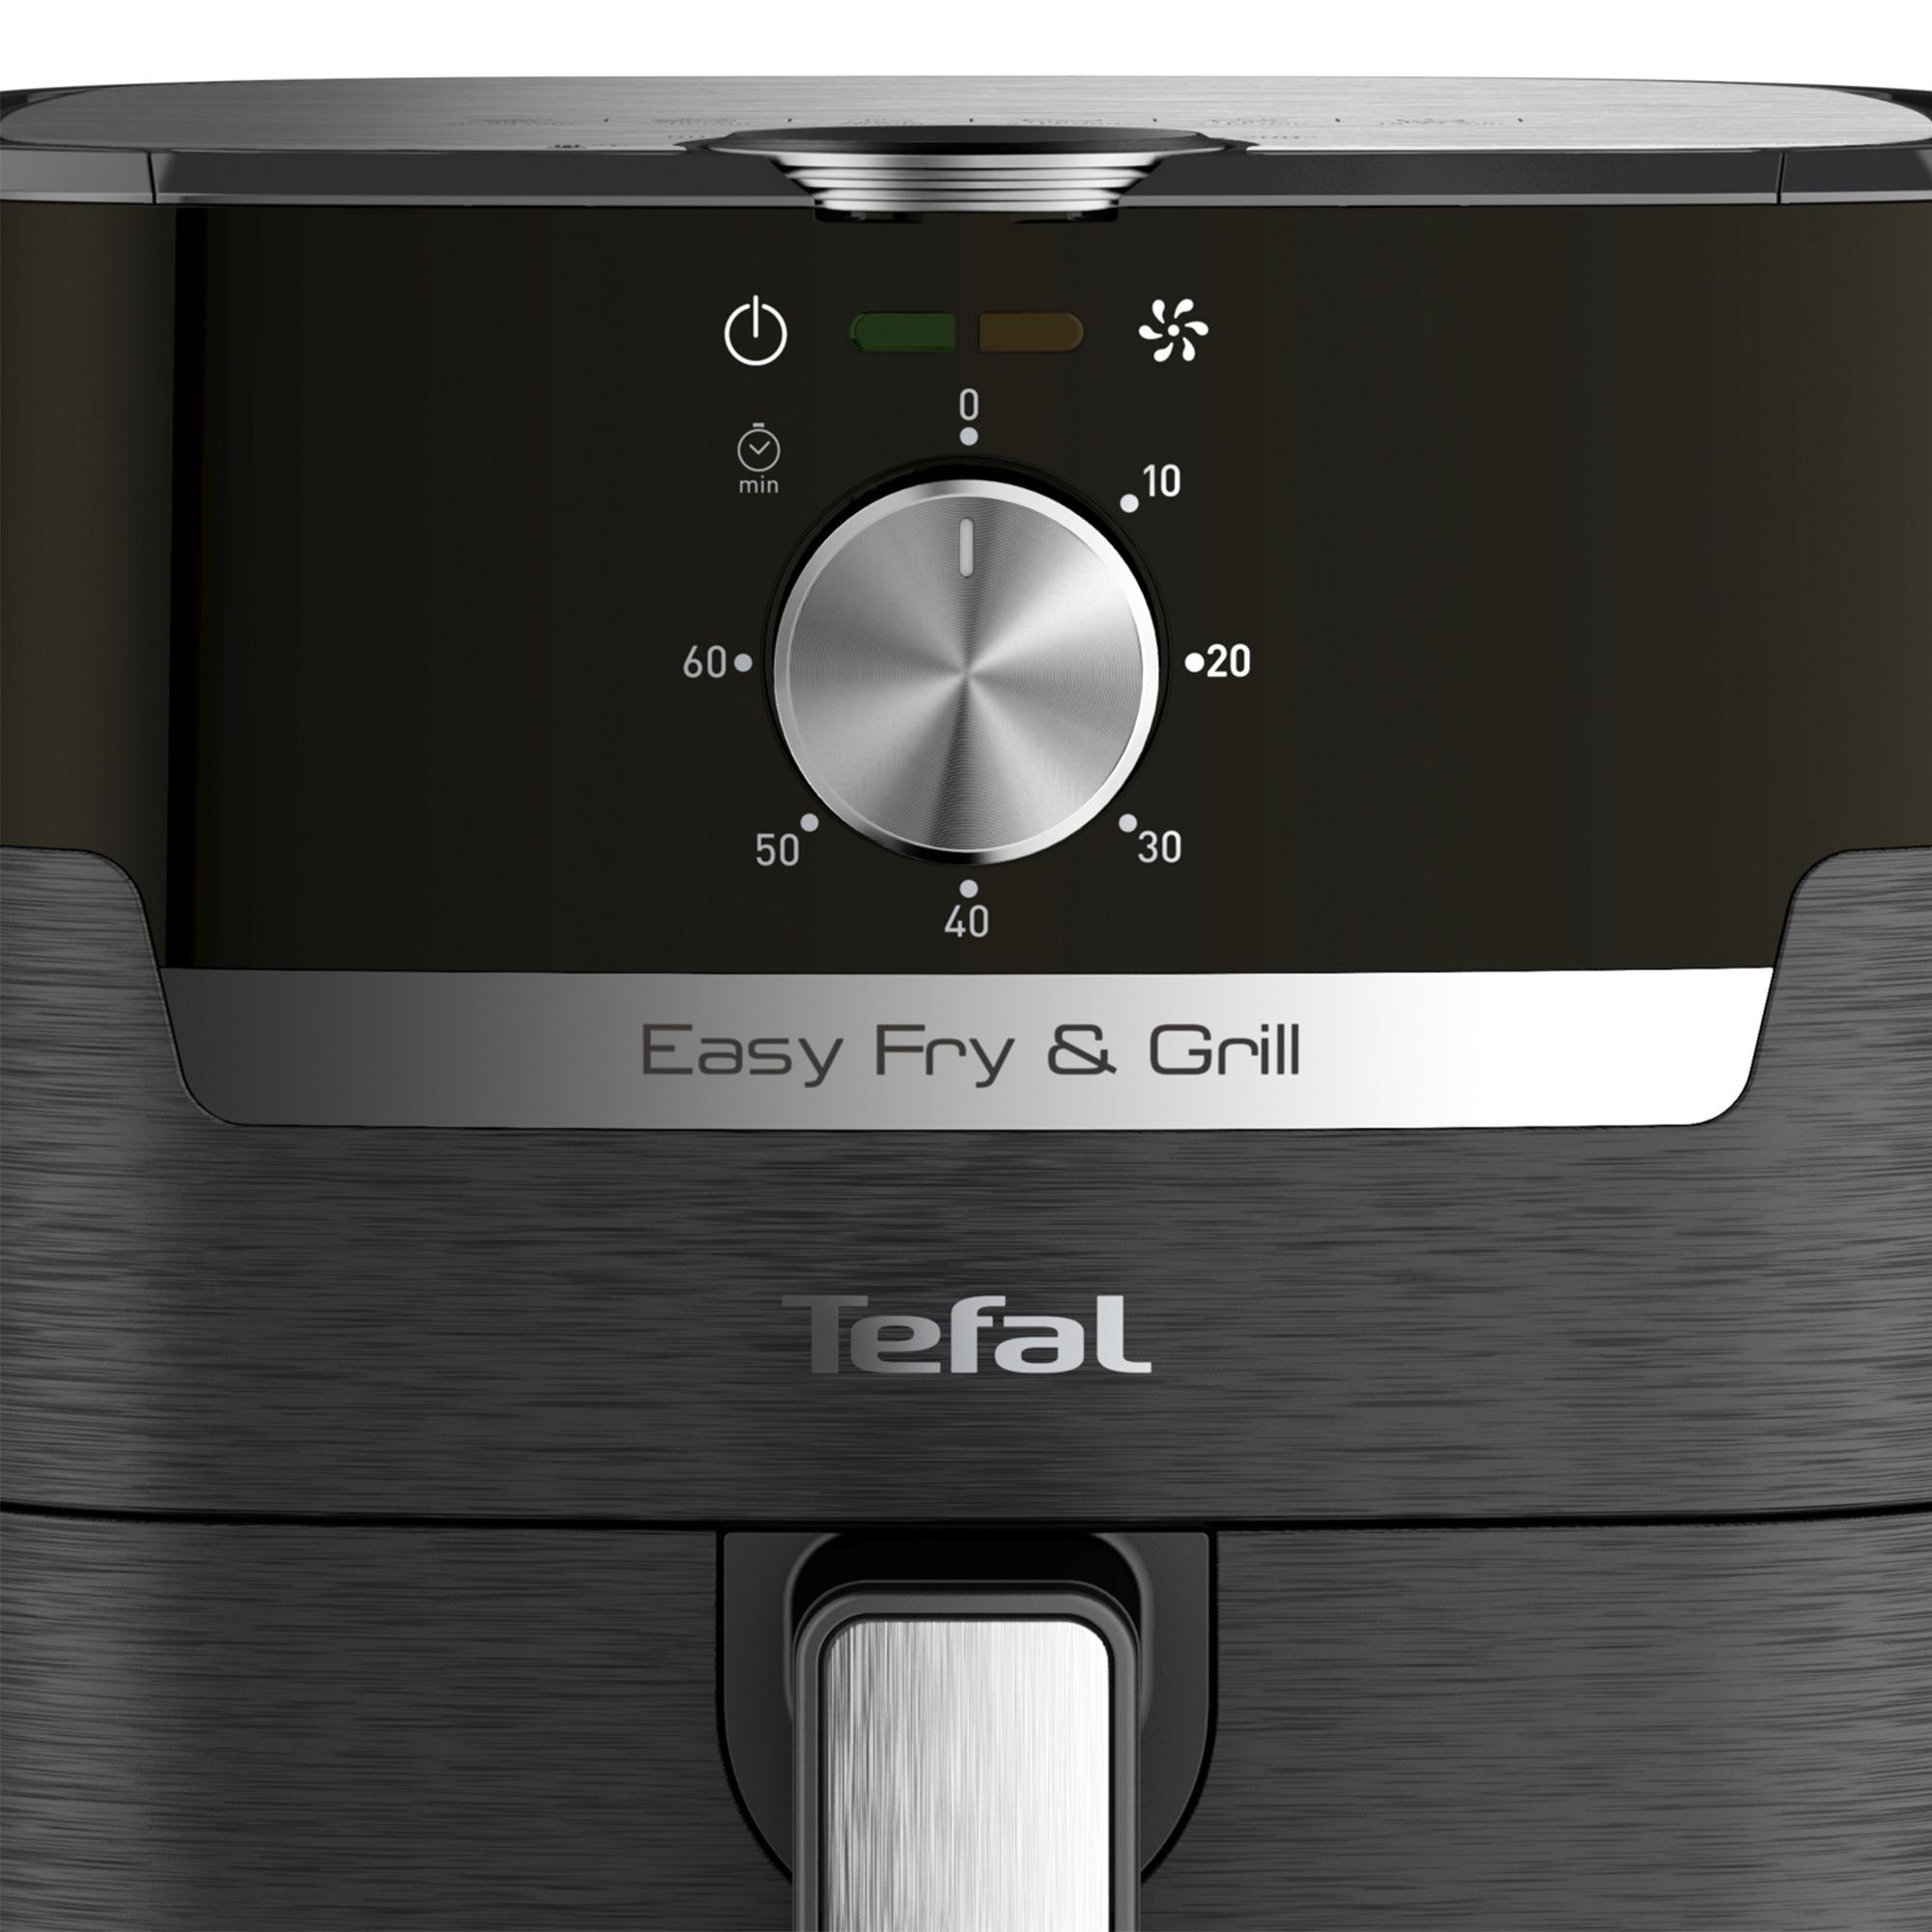 Tefal Easy Fry & Grill EY5018 Classic Air Fryer 4.2L Black Image 6